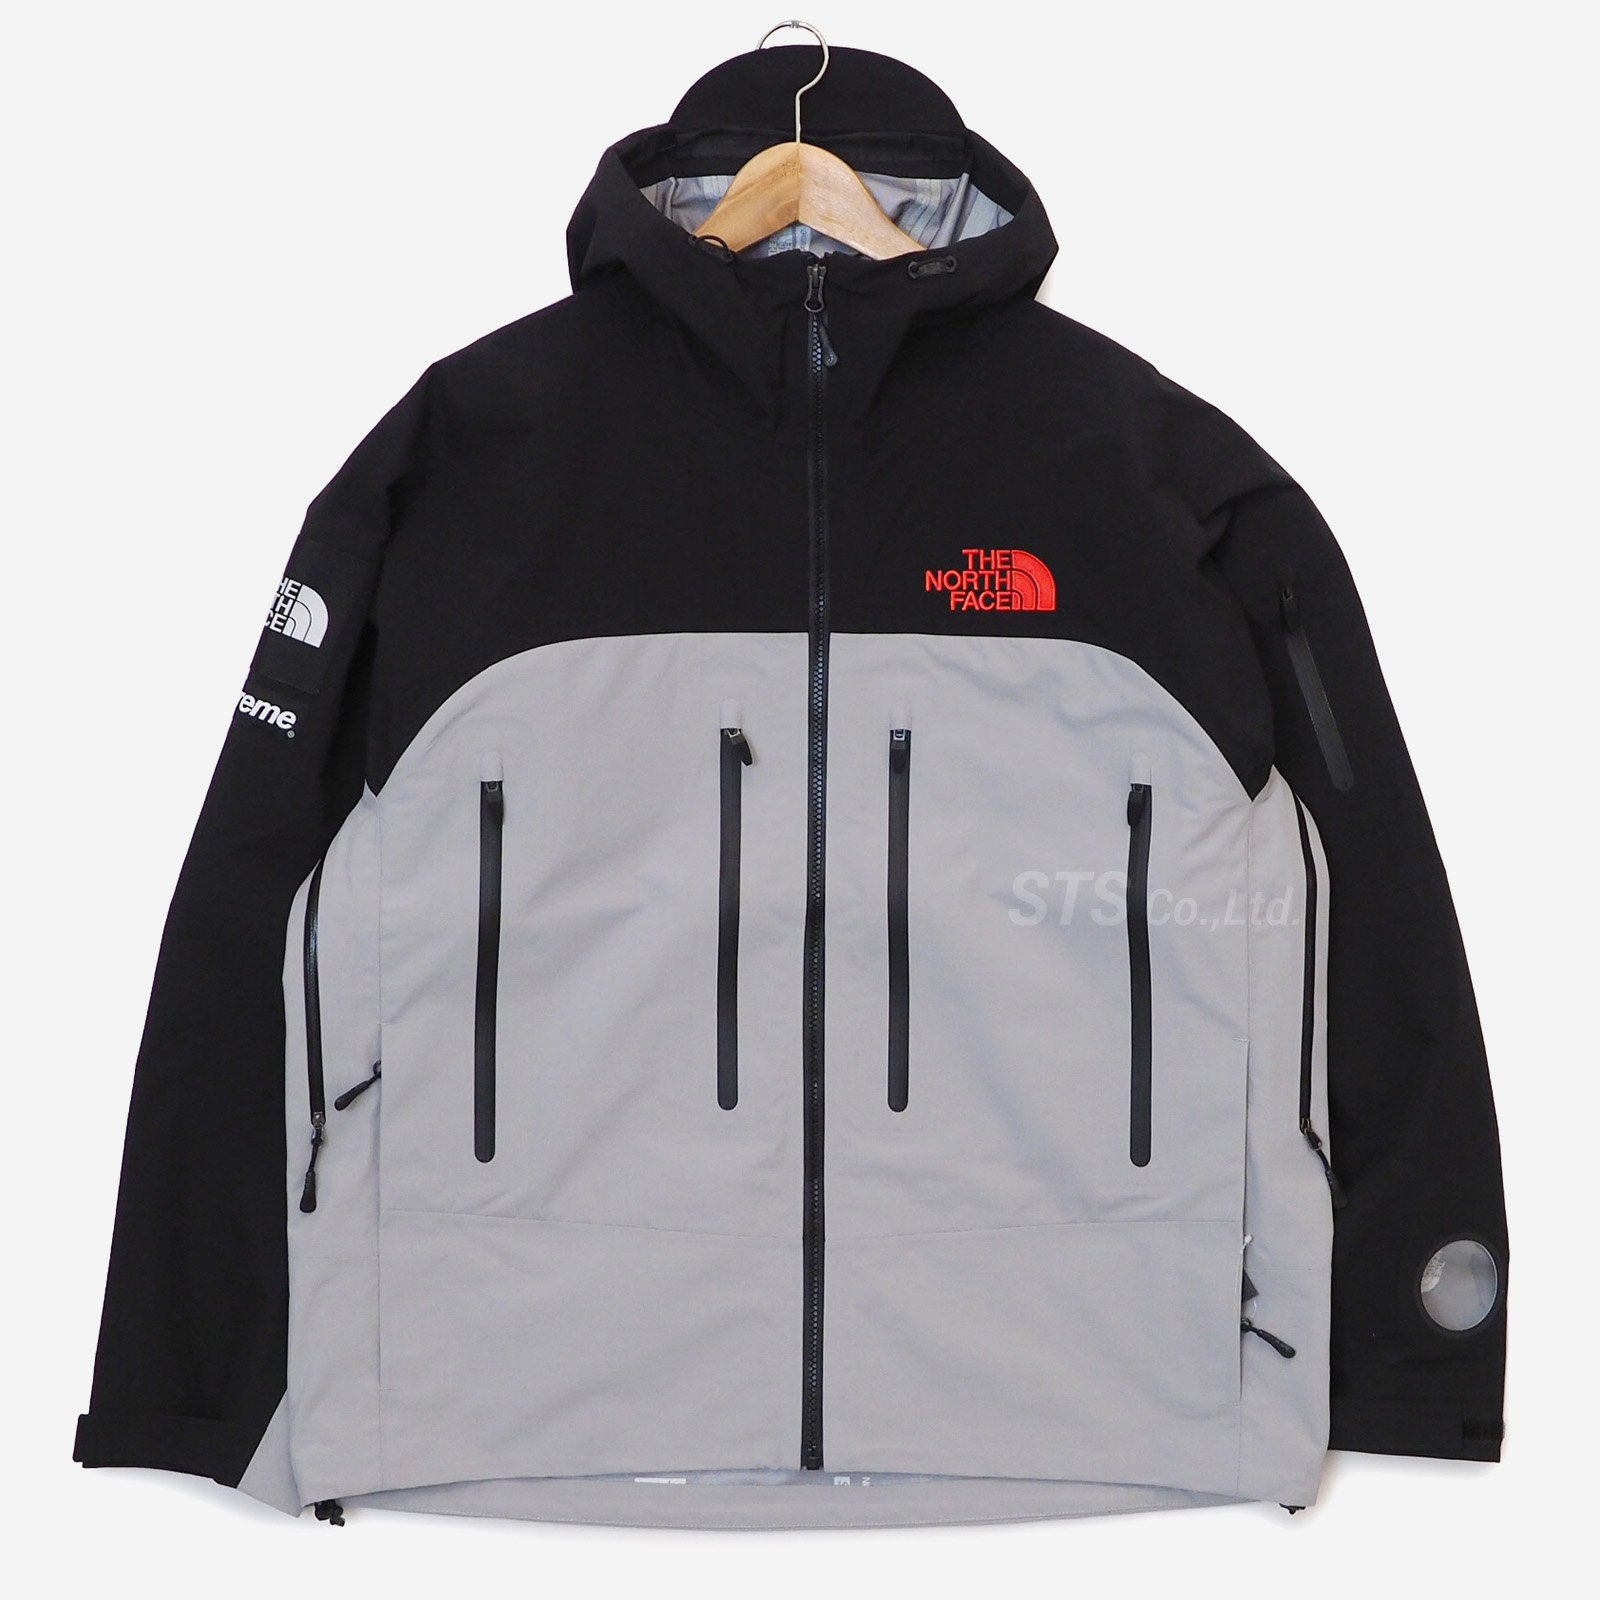 Supreme/The North Face Taped Seam Shell Jacket - ParkSIDER